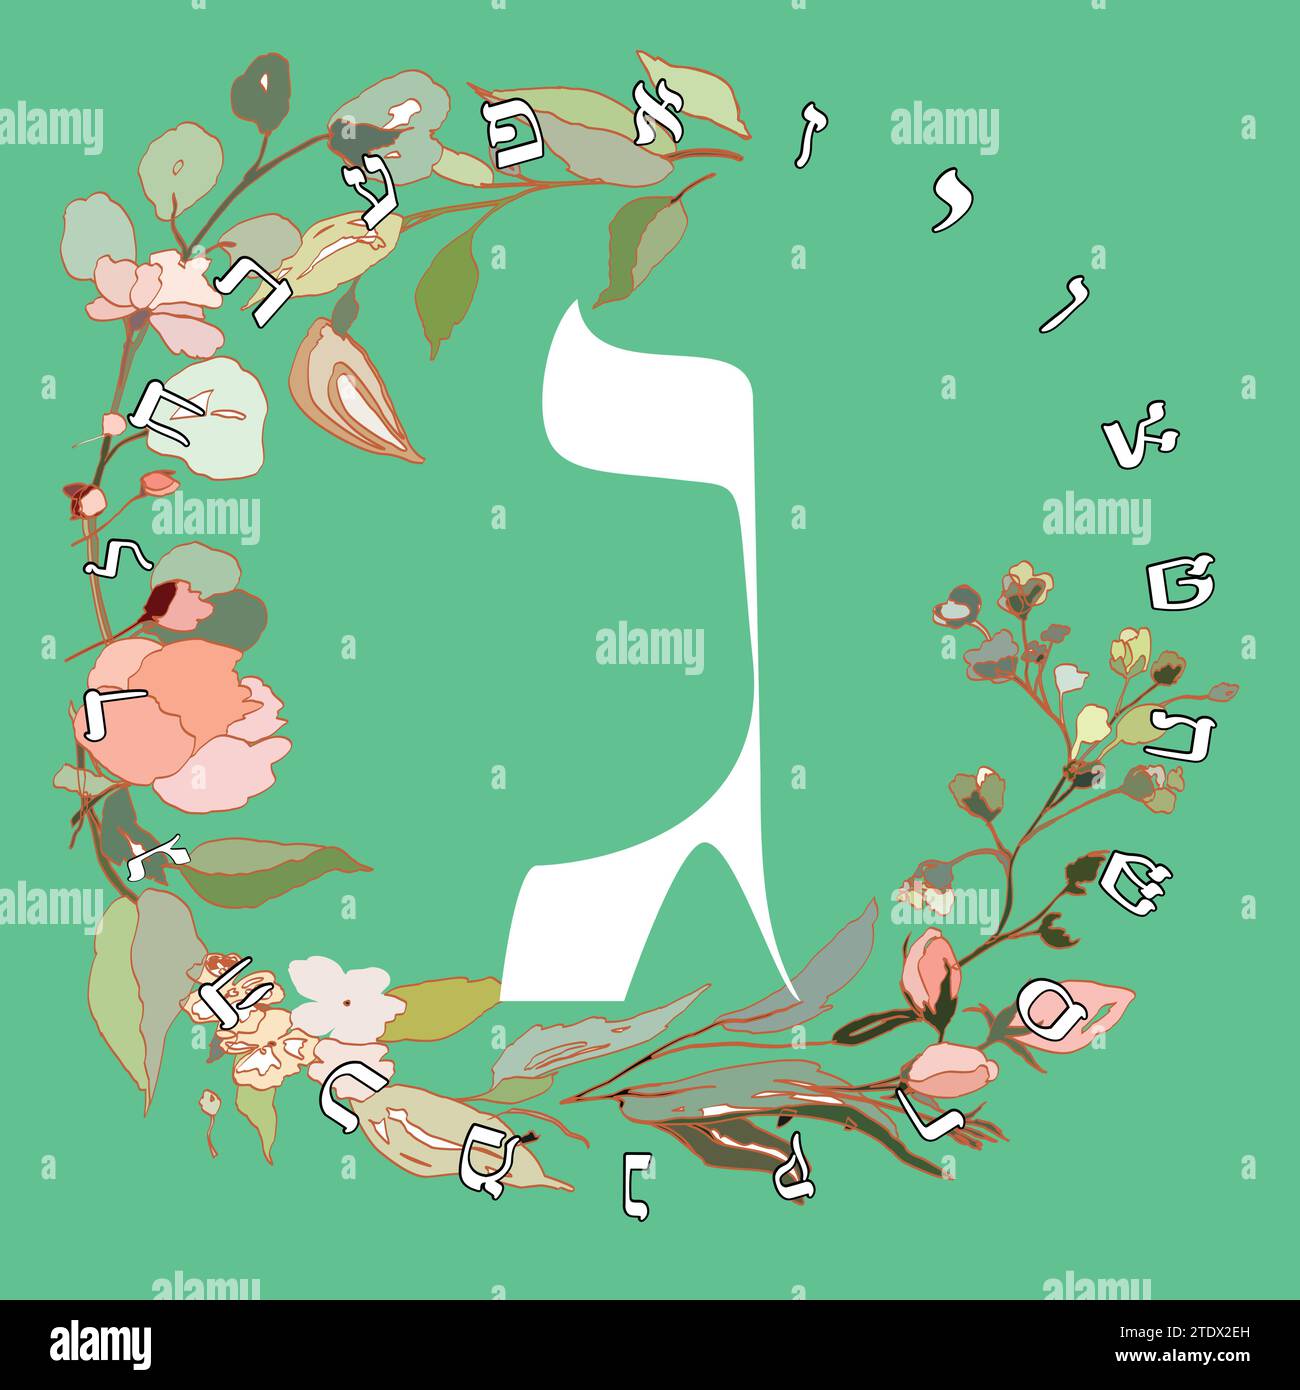 Vector illustration of the Hebrew alphabet with floral design. Hebrew letter called Gimel white on green background. Stock Vector